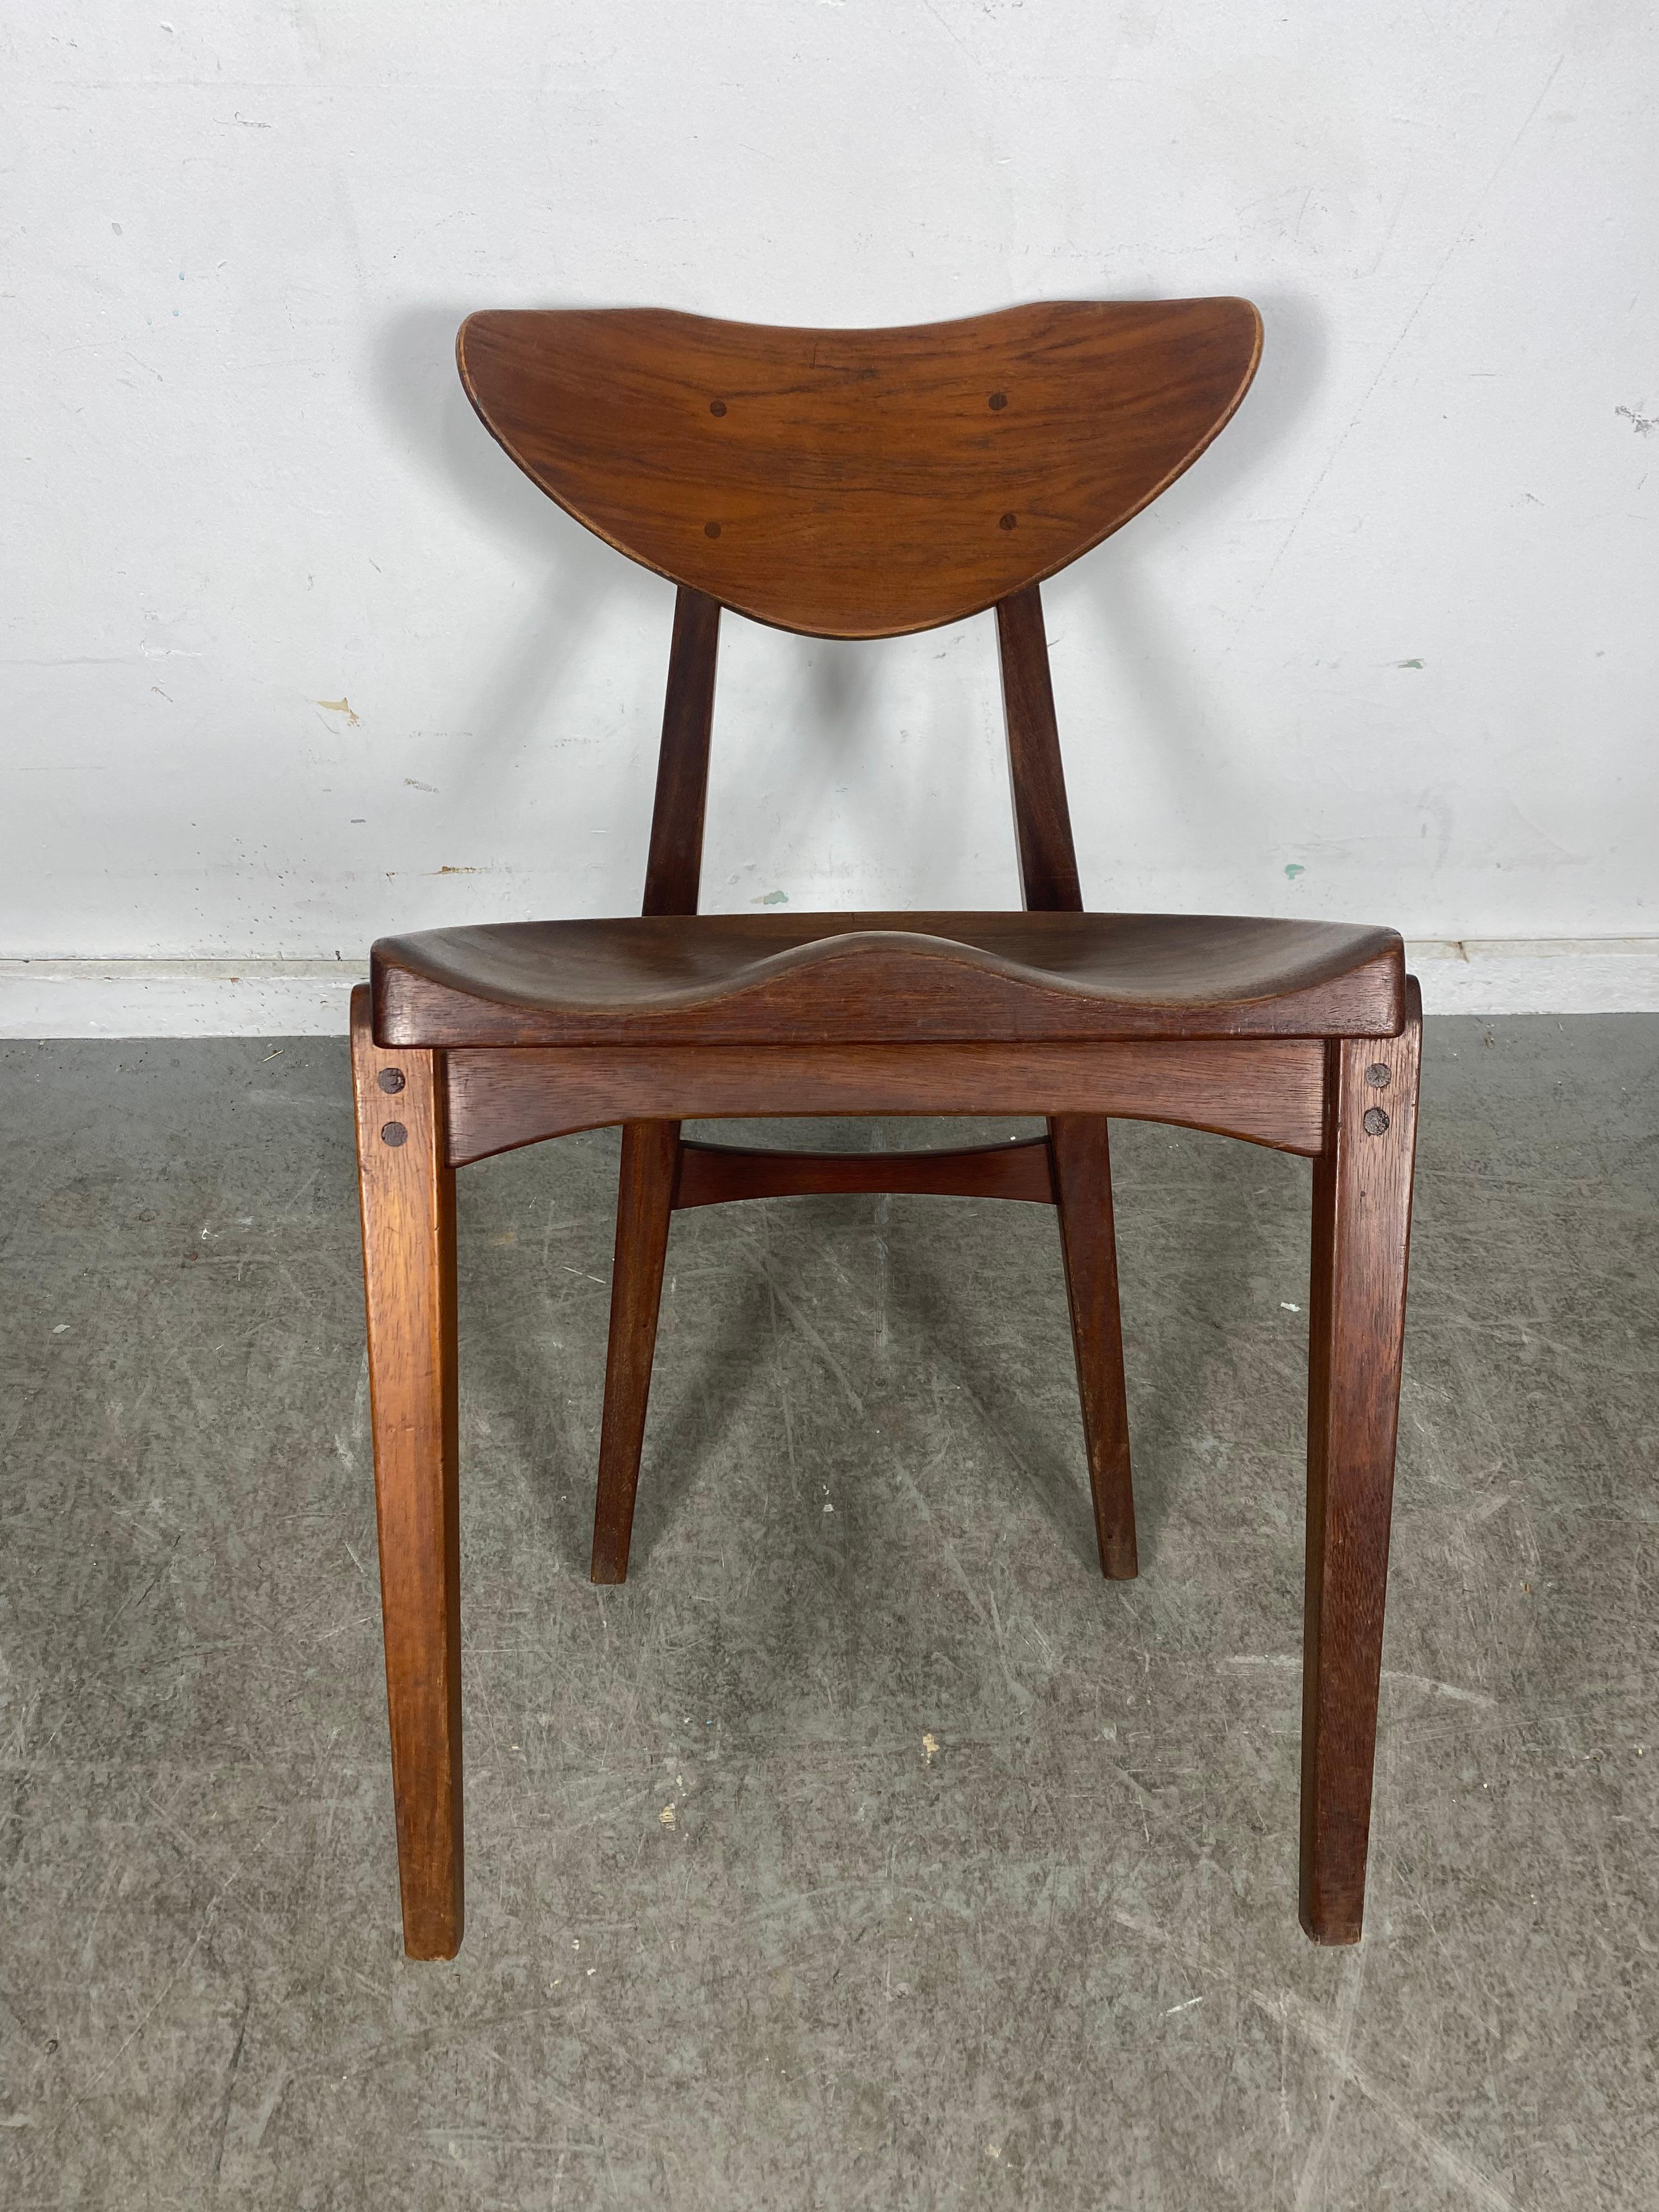 Richard Jensen and Kjaerulff Rasmussen, teak, Denmark, 1960s

This striking teak dining / desk chair was designed by Richard Jensen and Kjaerulff Rasmussen. What characterizes the chair is the combination of angled frame and organic shaped seat